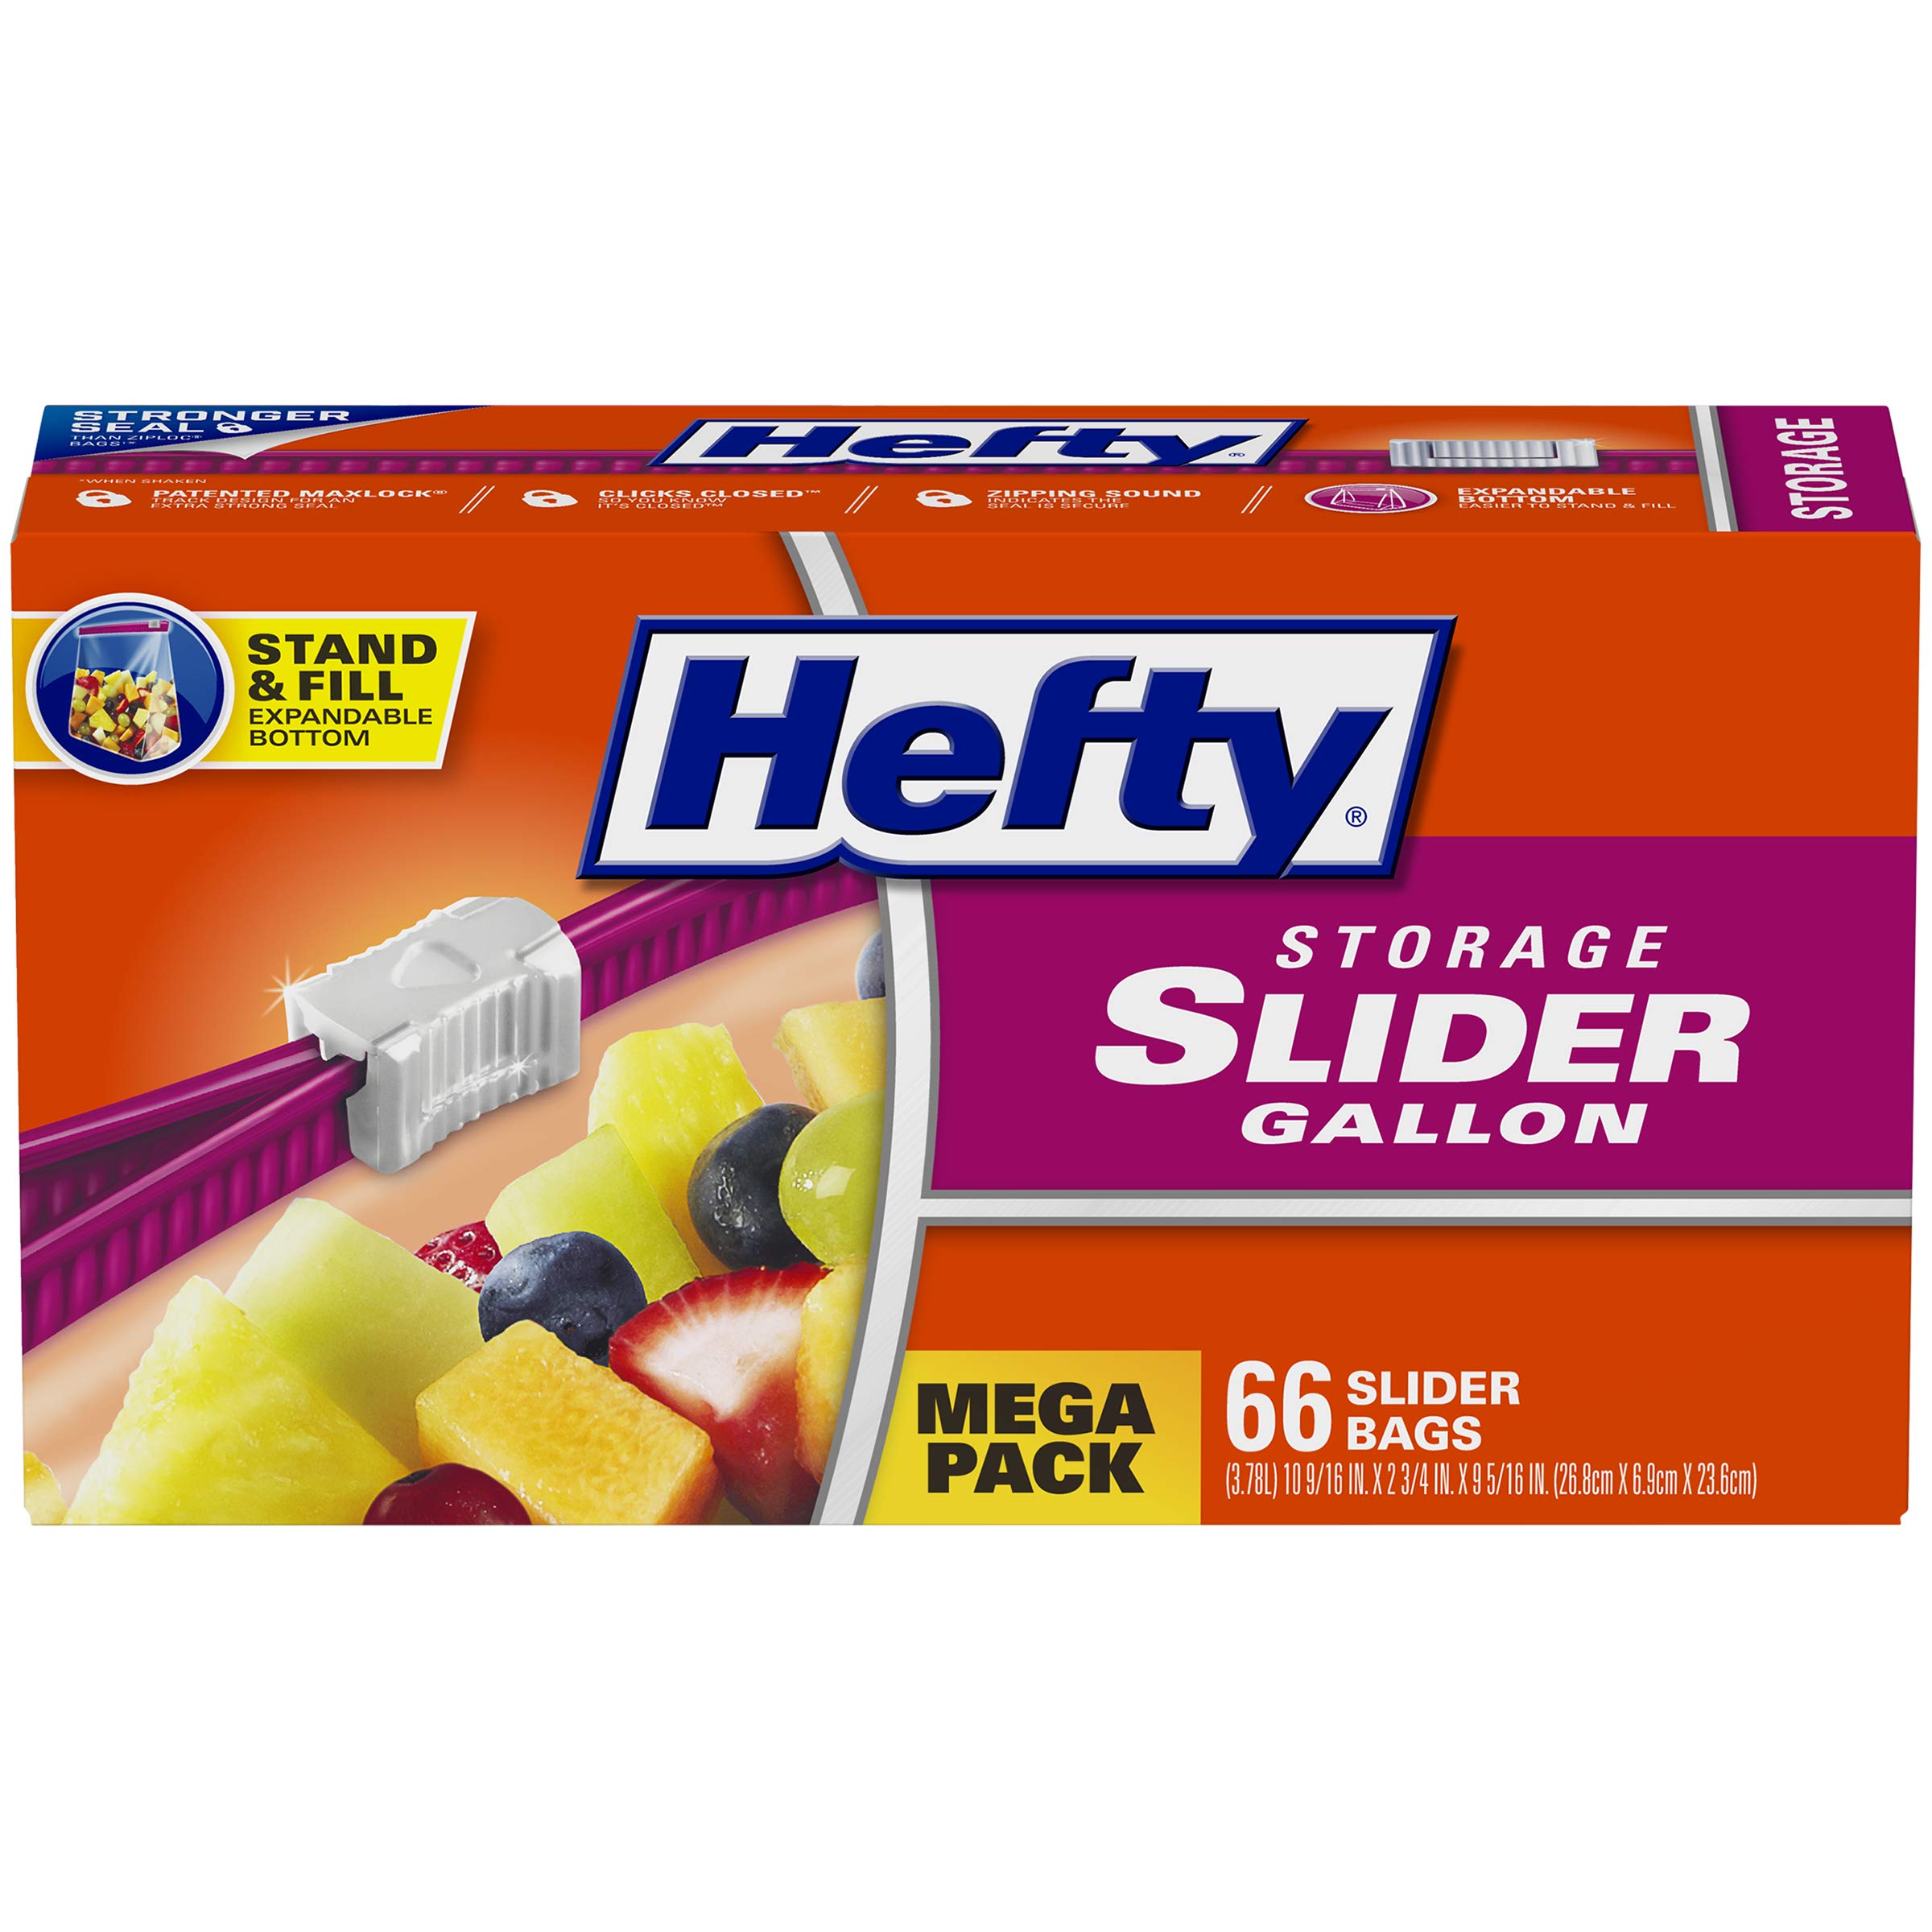 Hefty Slider Storage Bags, Gallon Size, 66 Count - $15.37